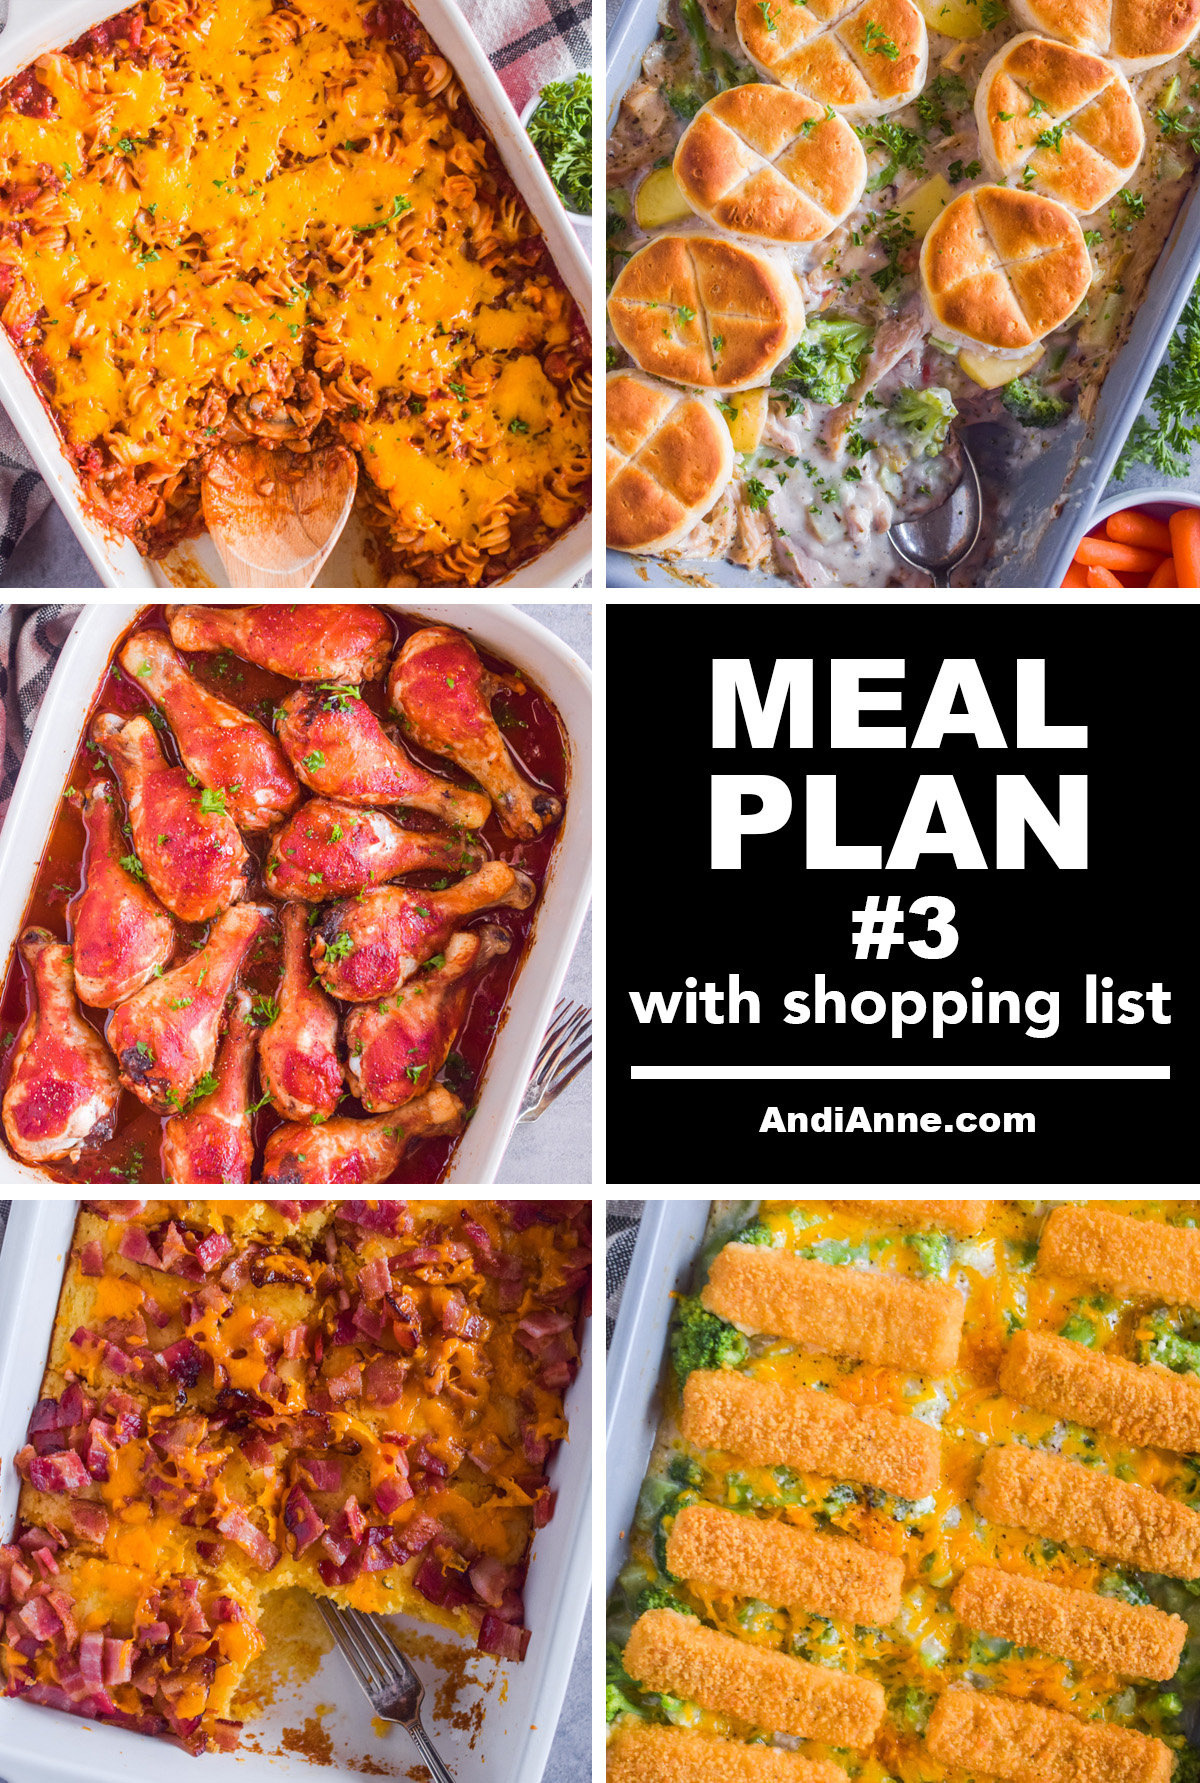 Meal plan #3 with shopping list and images of all three recipes including chicken pot pie casserole, hamburger casserole, sweet and sour chicken legs, bacon and cheese pancake casserole, broccoli and fish stick casserole.